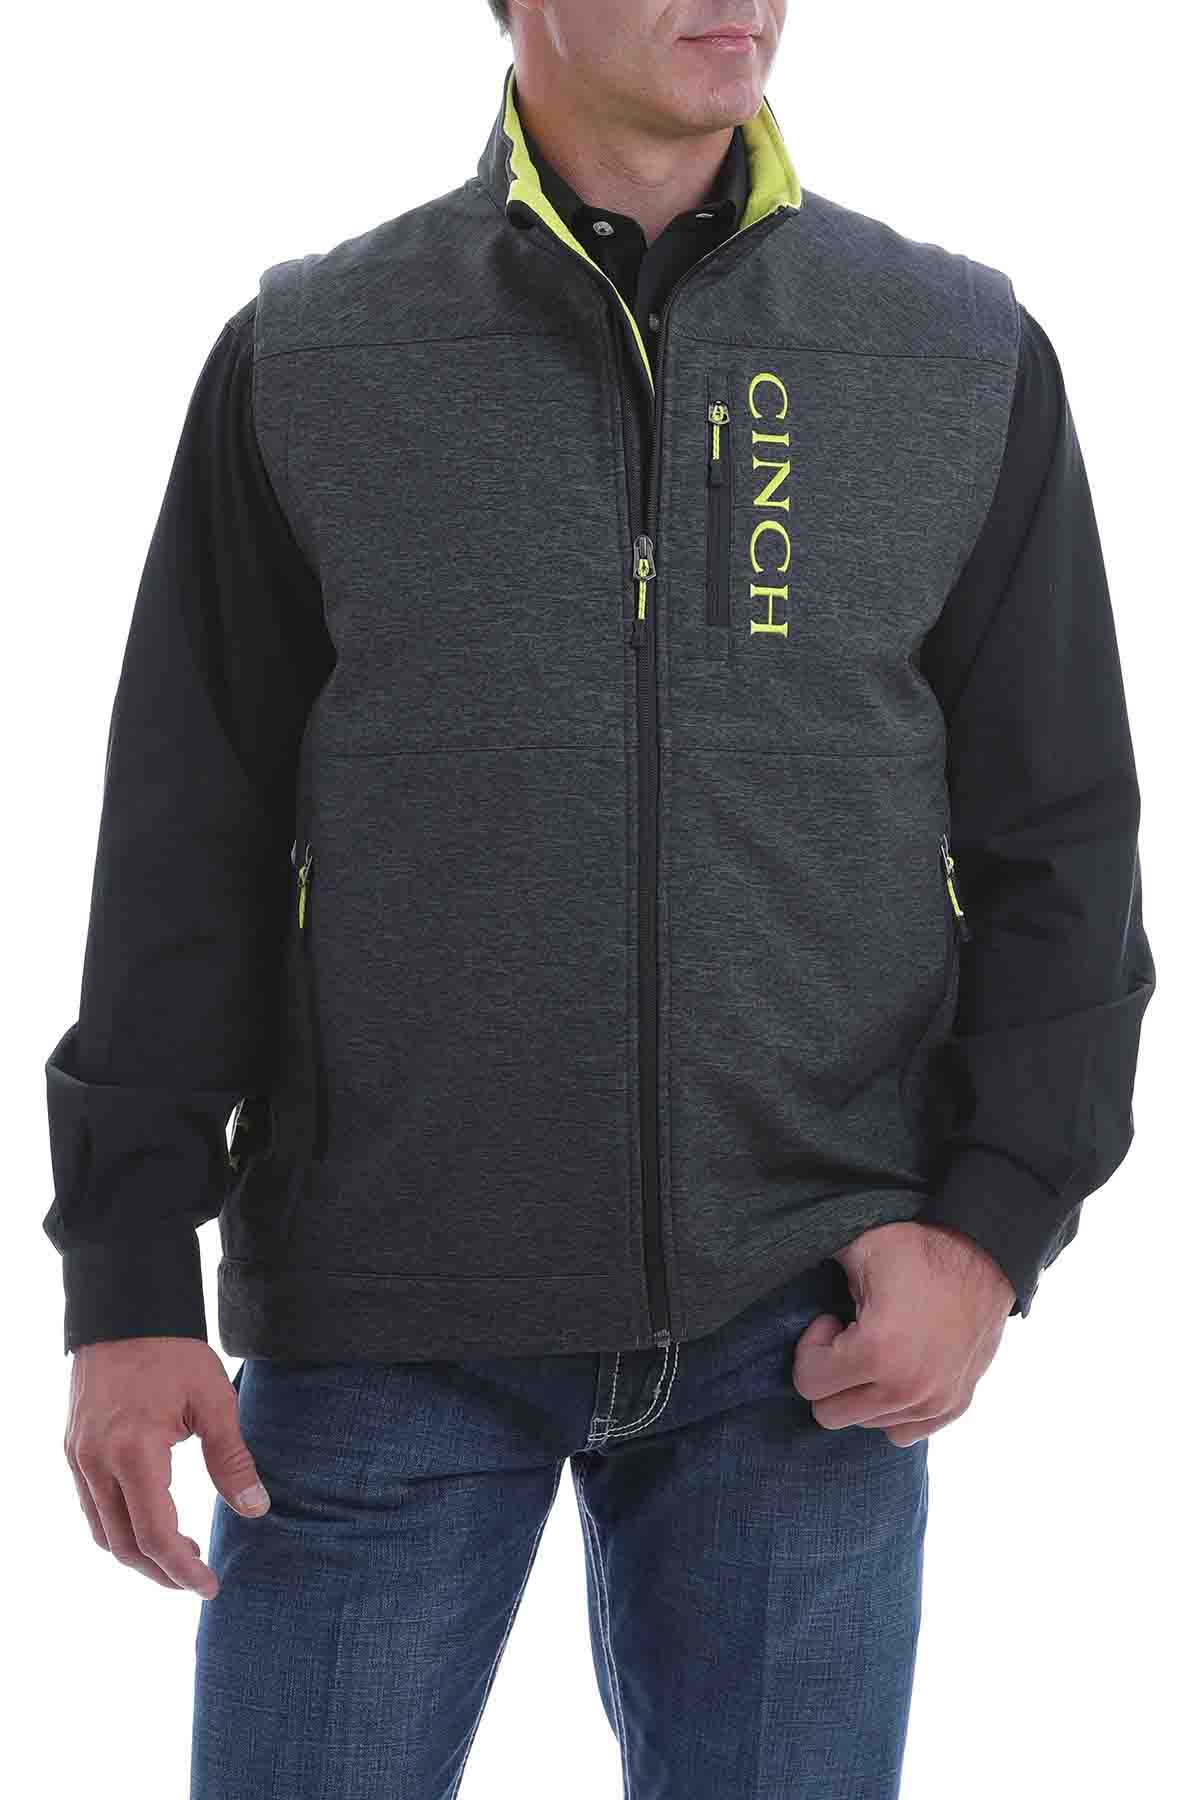 Cinch Textured Bonded Vest Charcoal-Yellow